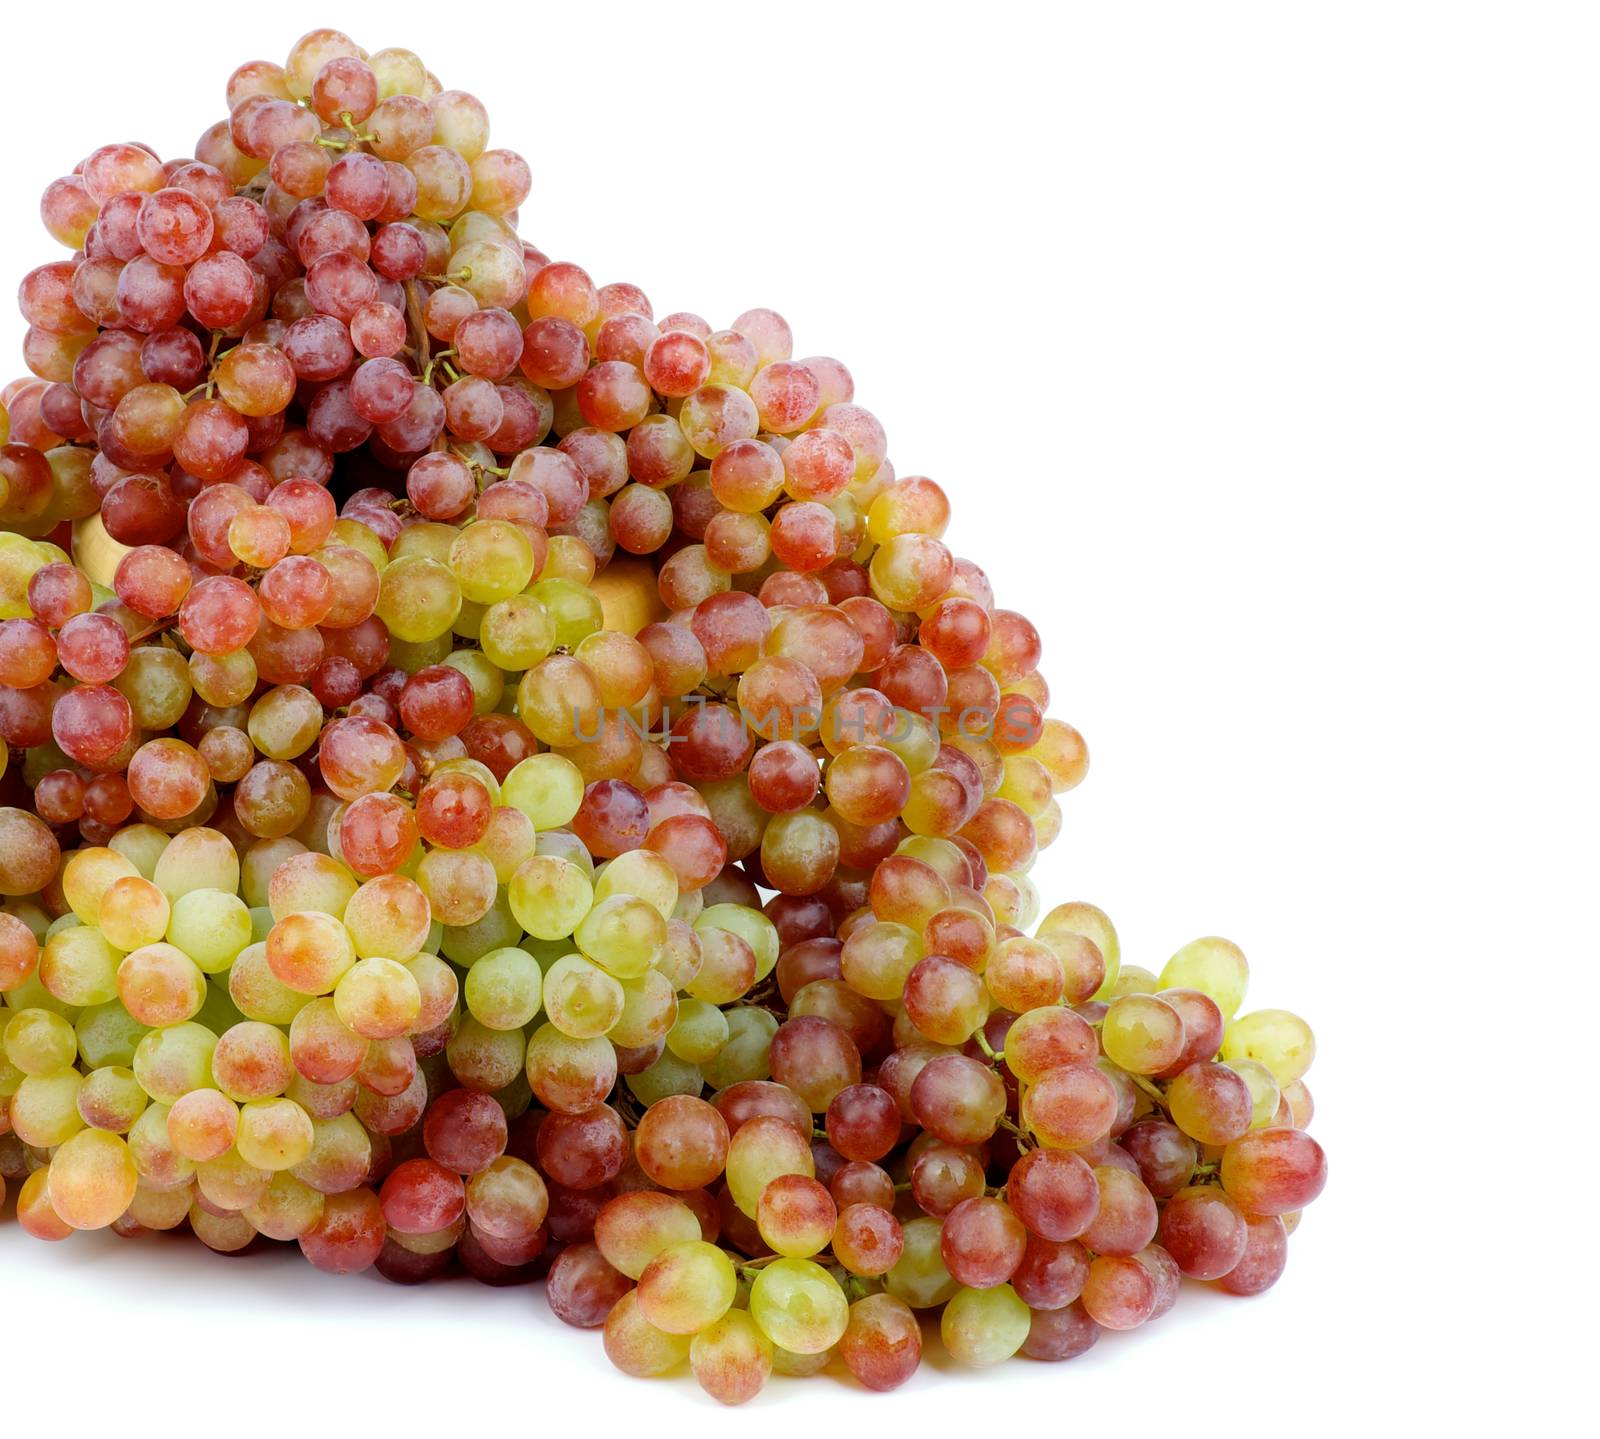 Heap of Sweet Ripe Pink Sultana Grape Cross Section on White background